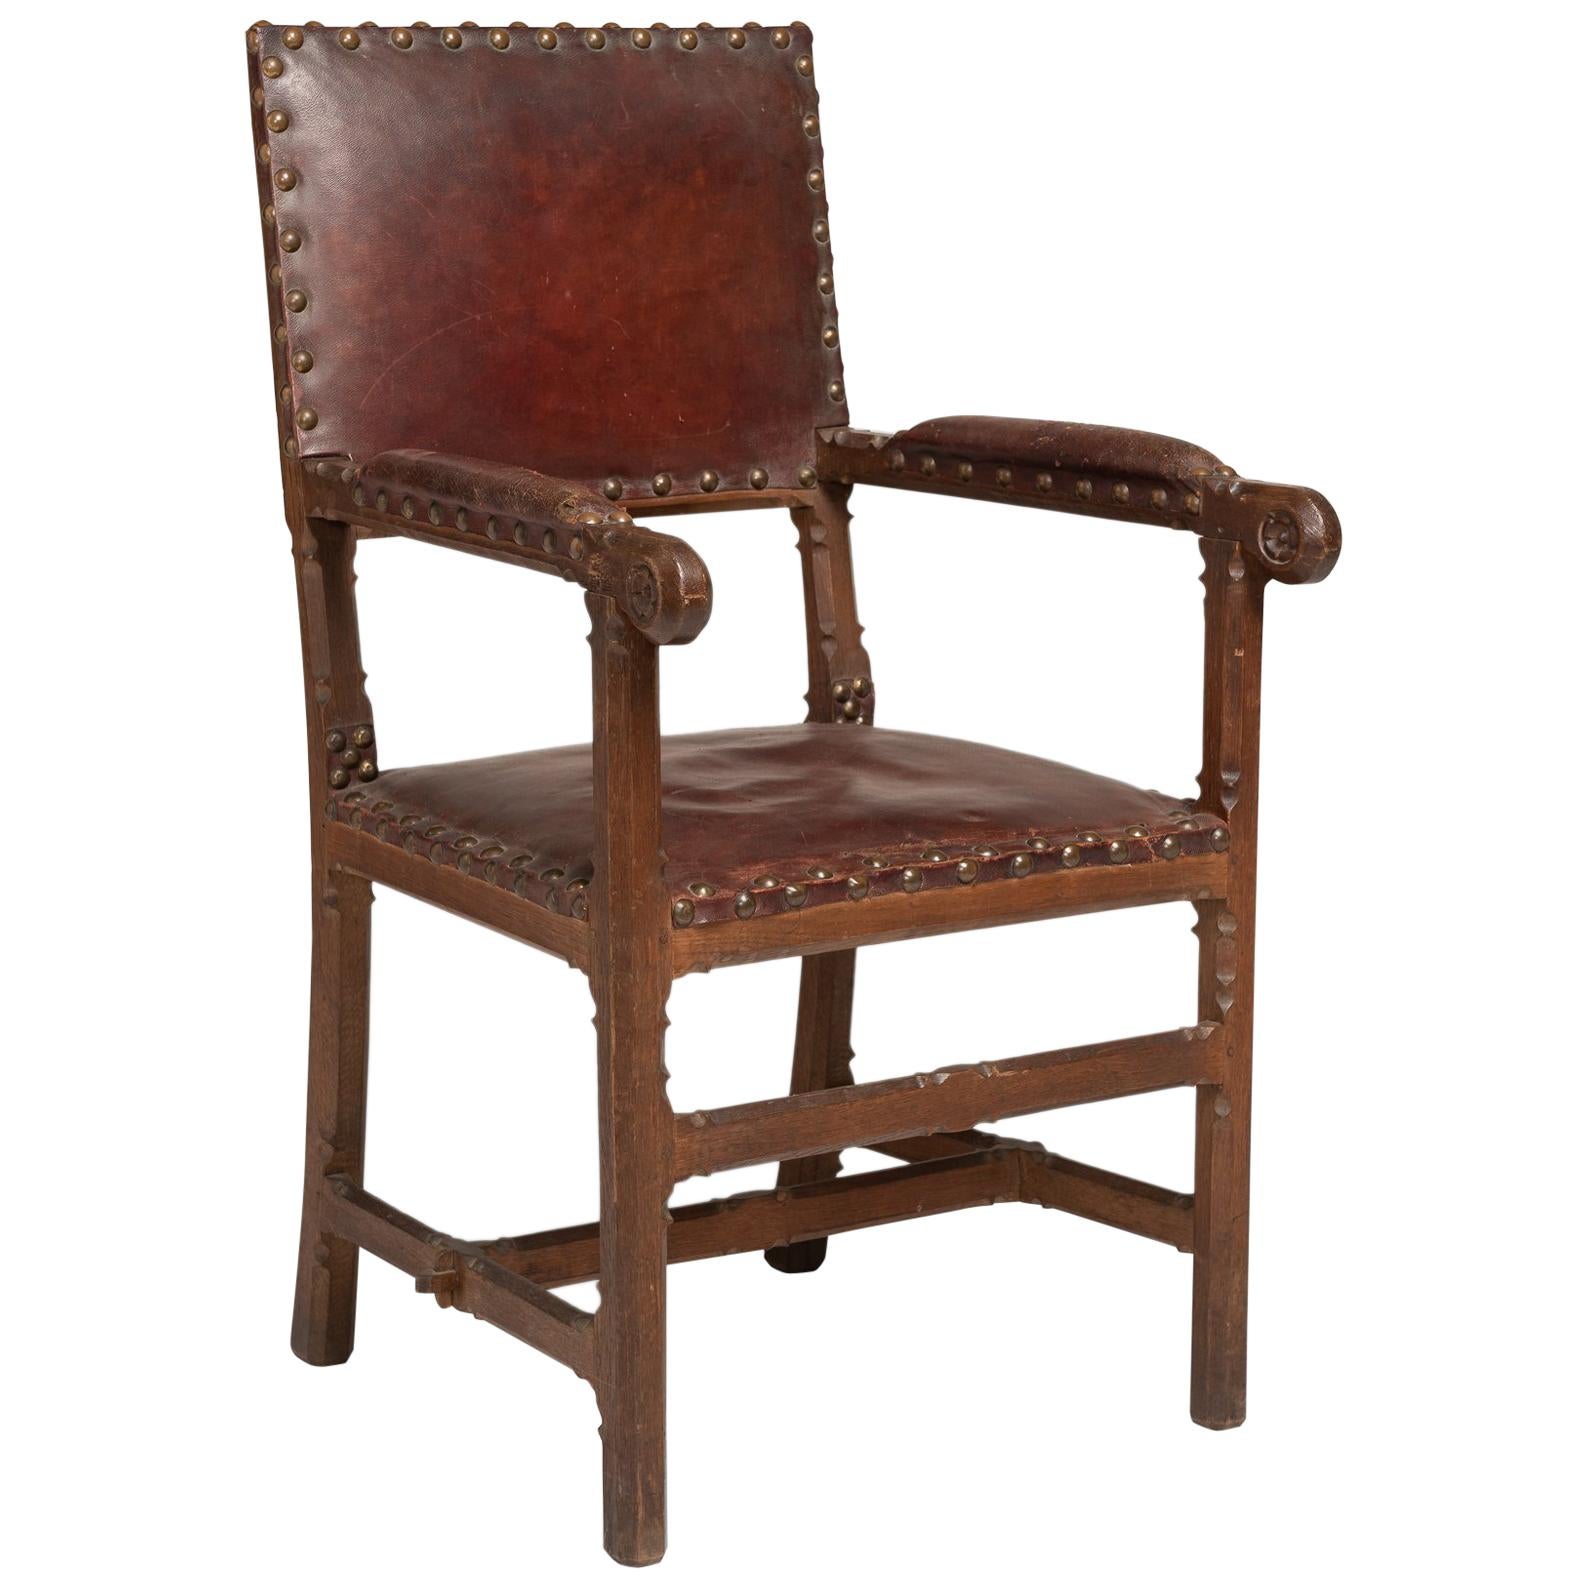 Gothic Oak and Leather Armchair, England, circa 1860